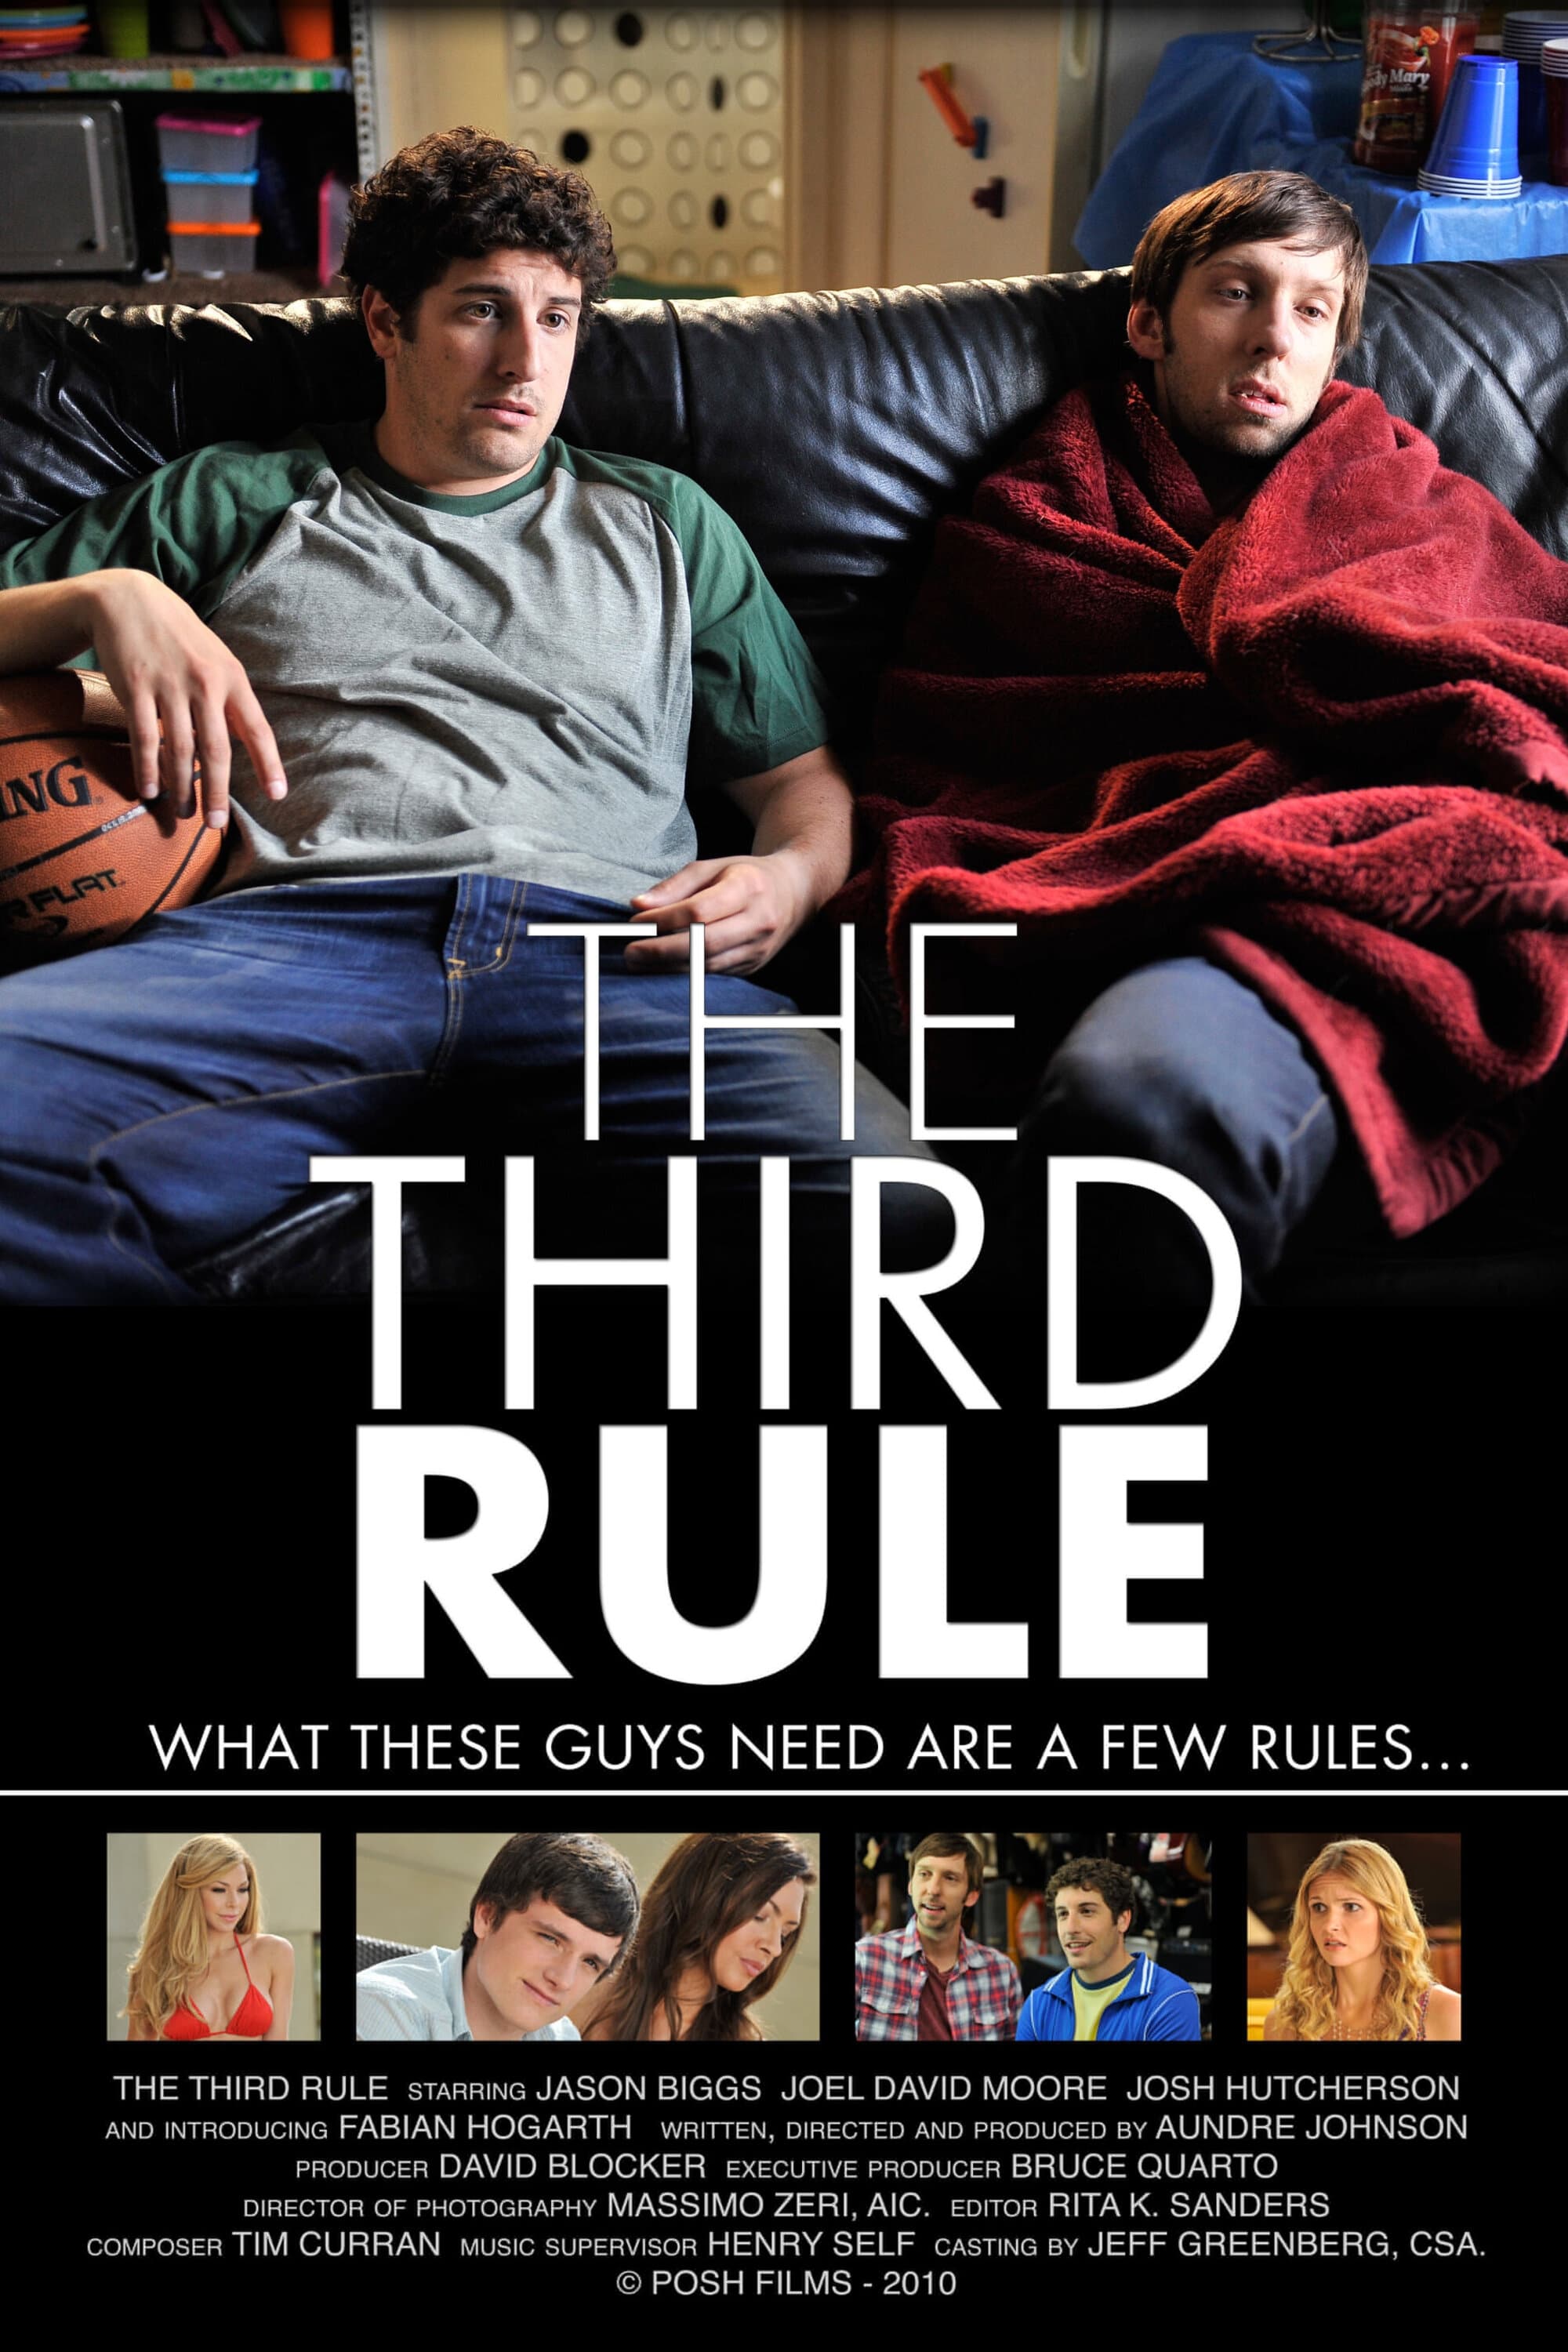 The Third Rule